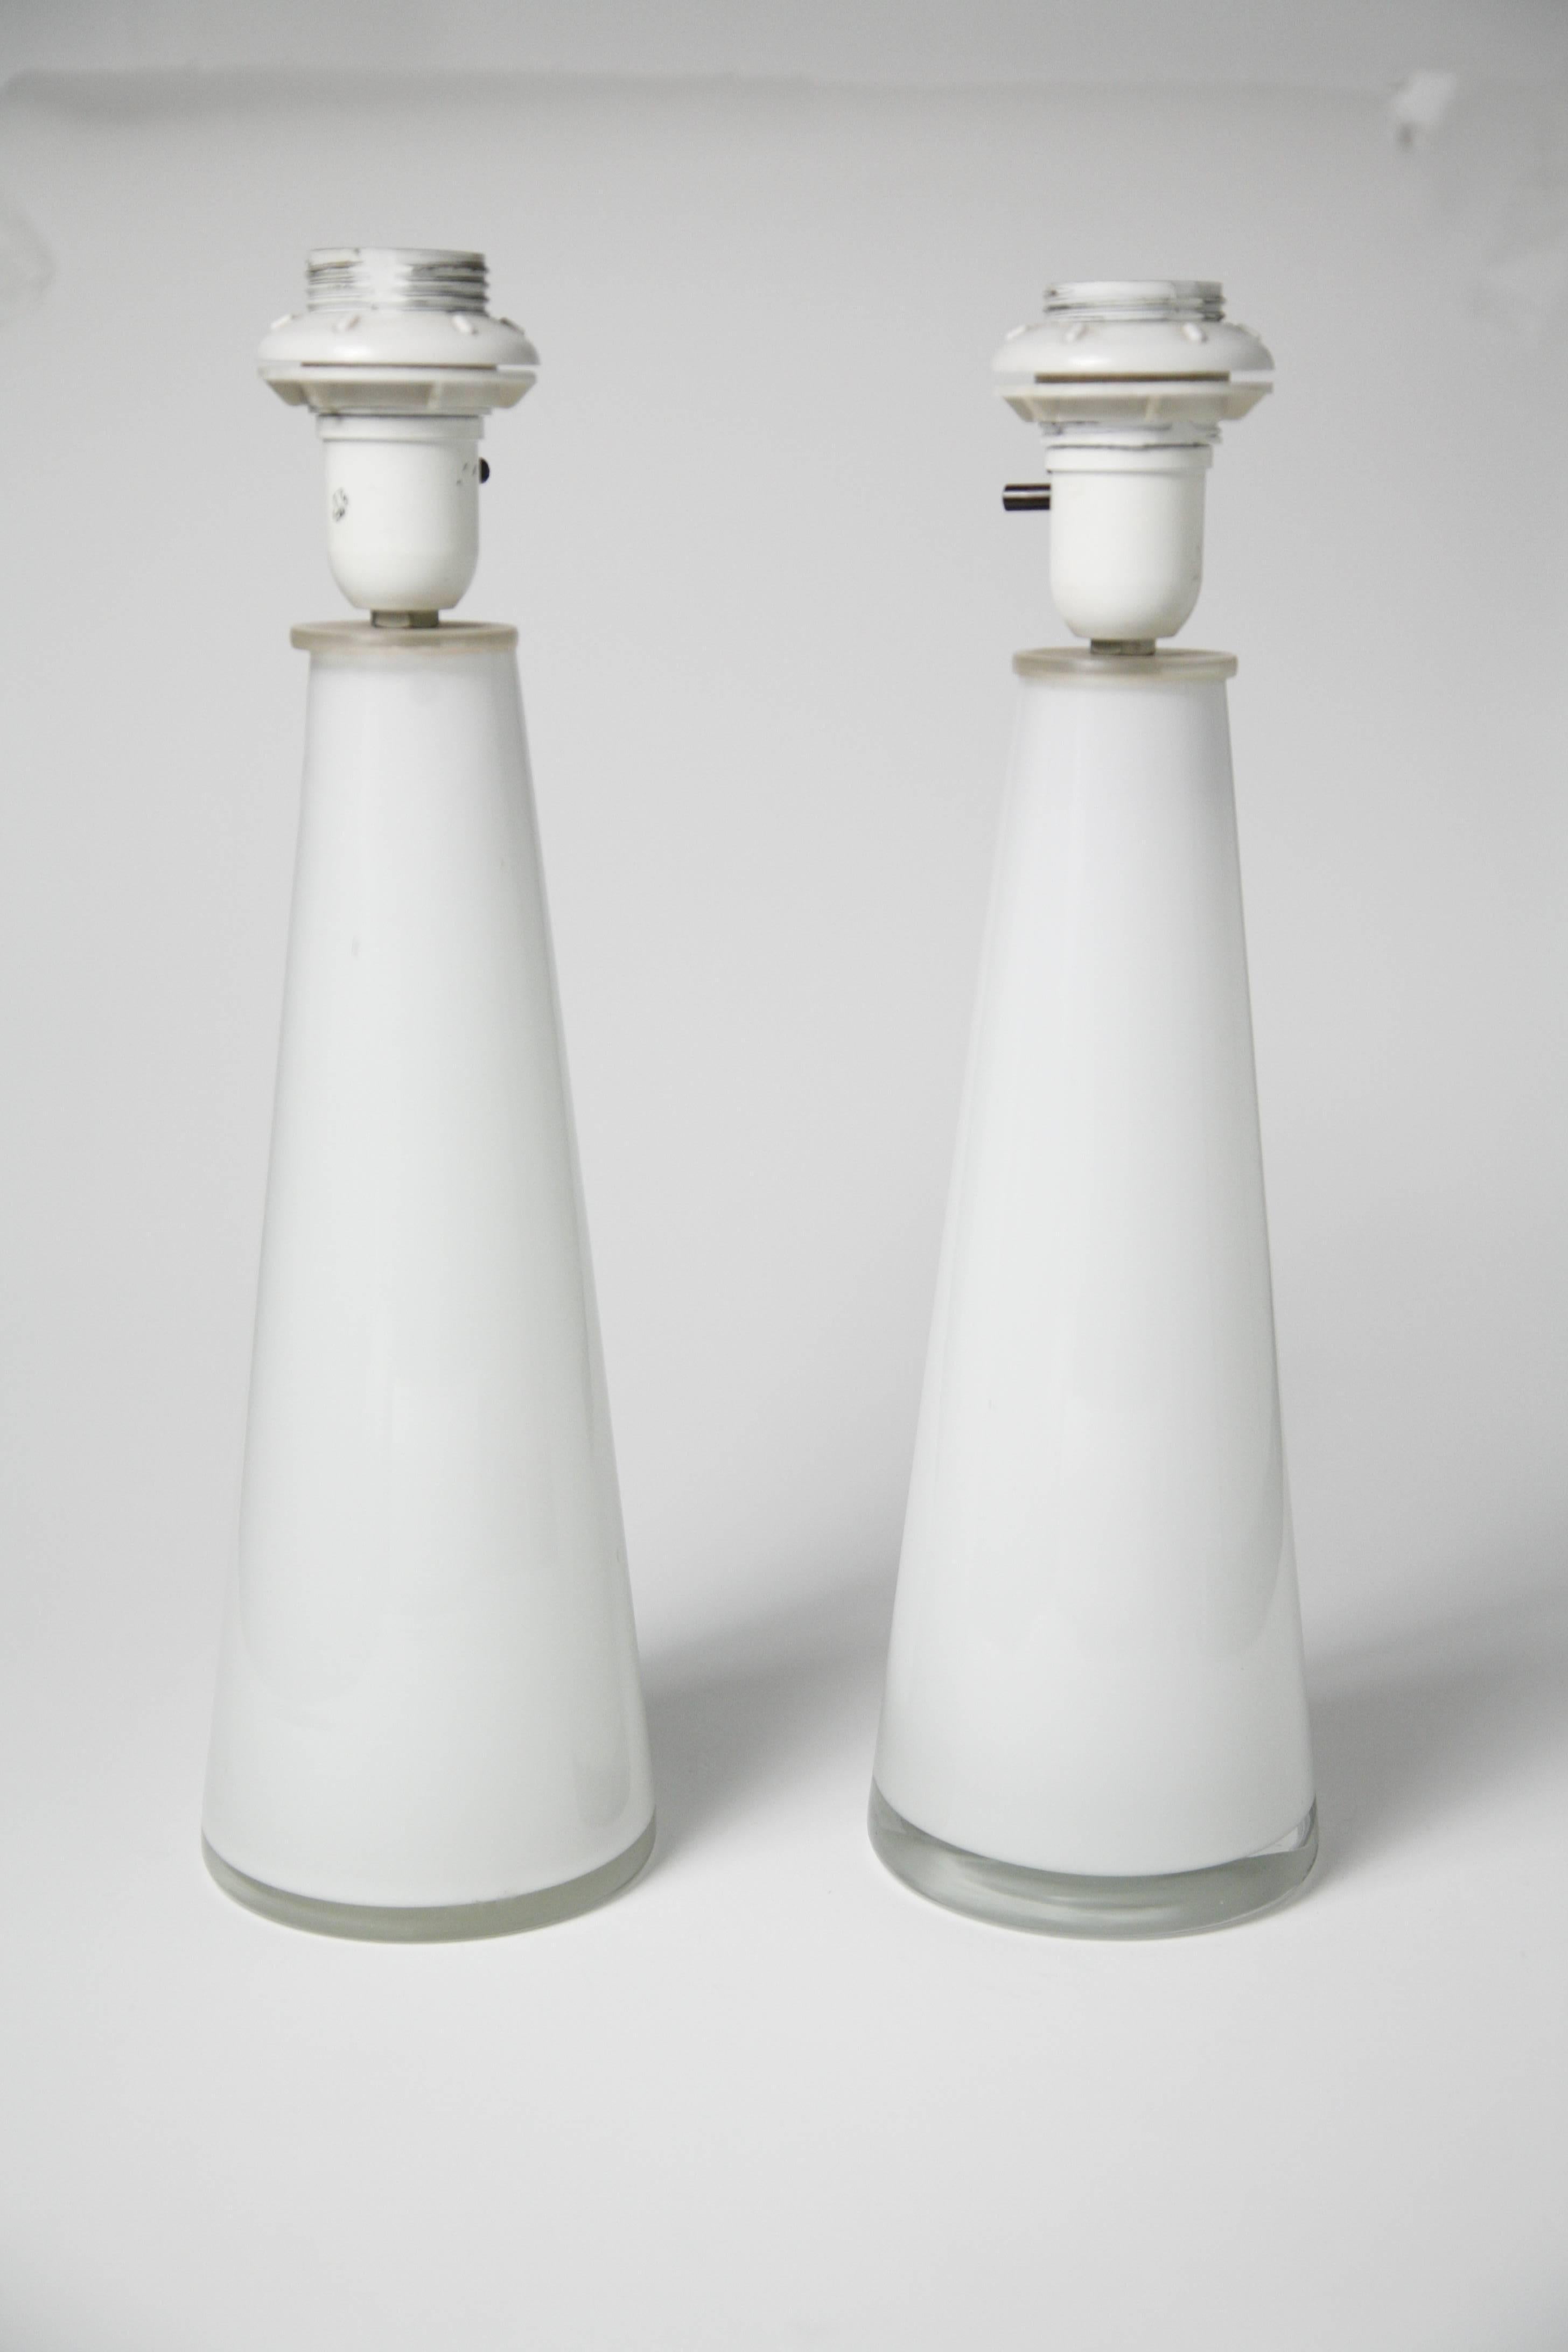 Pair of white heavy Orrefors glass lamps conical shaped, white glass incased in a layer of clear glass modern looking even after 50 years hand crafted incredible quality and design.